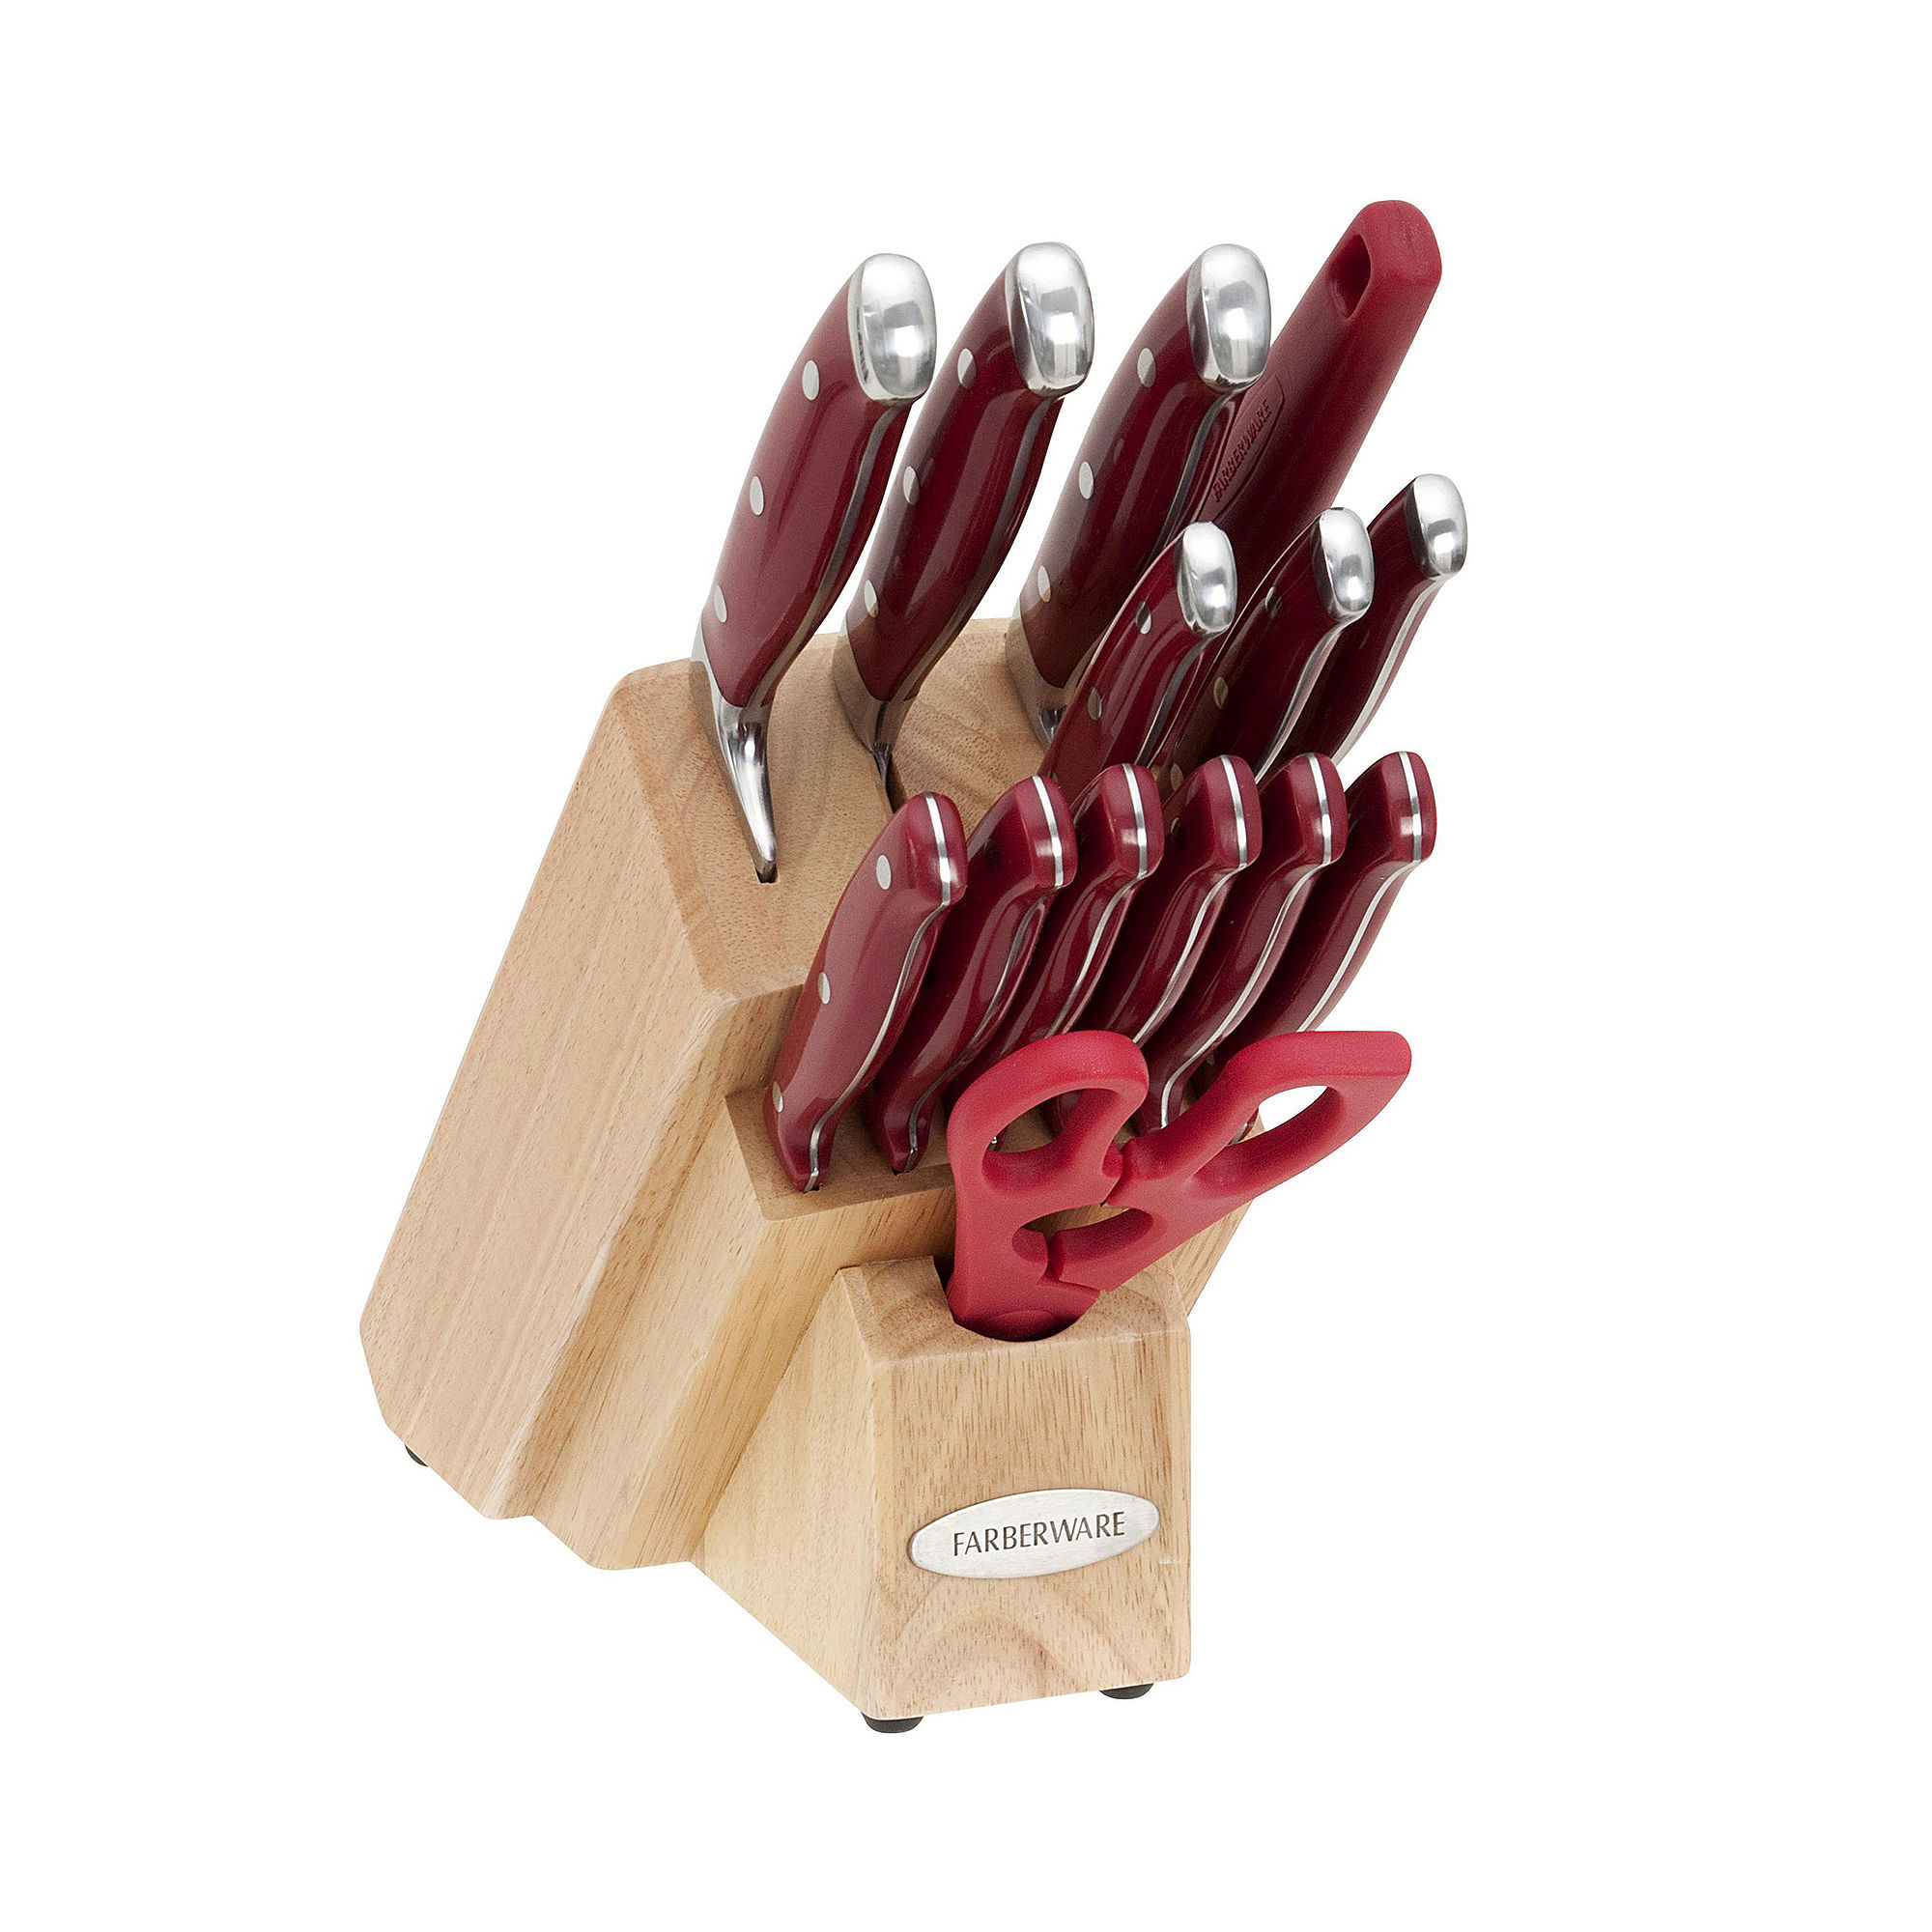 UPC 045908038342 product image for Farberware 15-pc. Red Forged Knife Set | upcitemdb.com